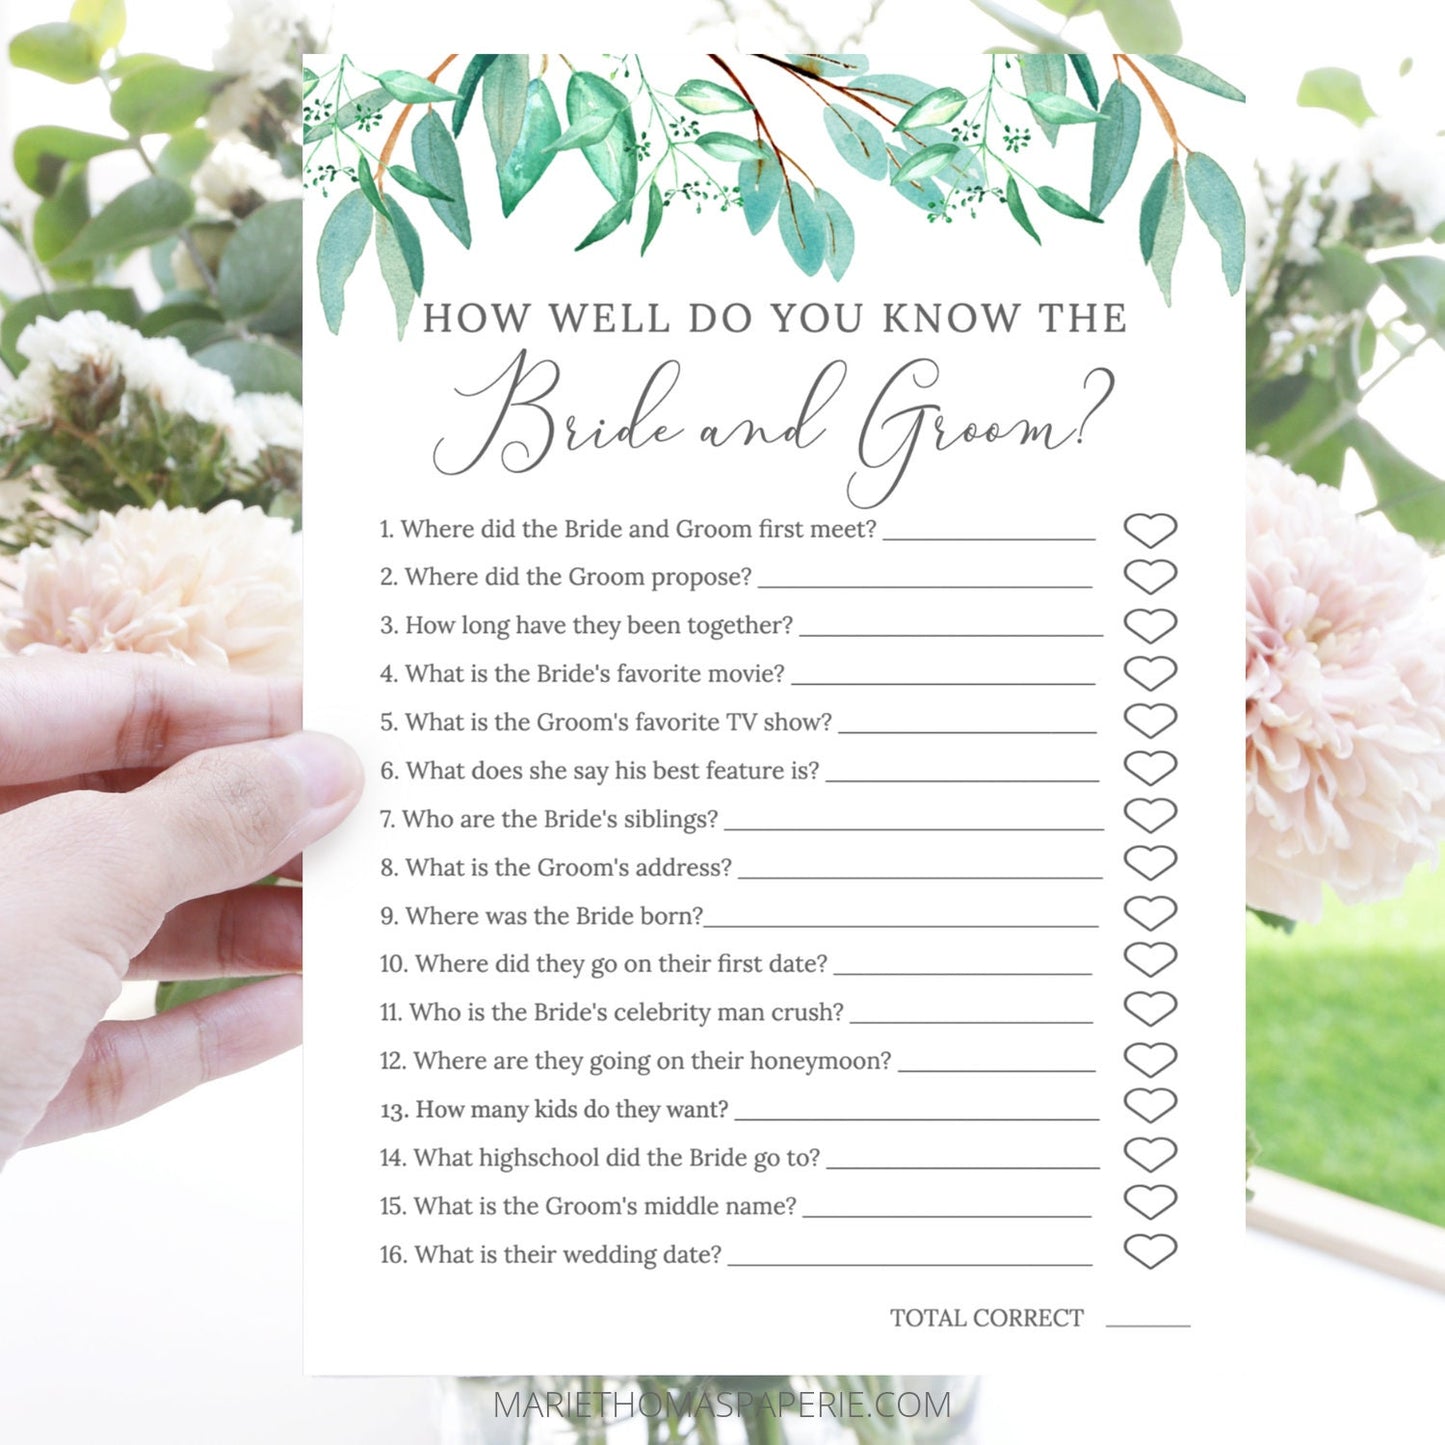 Editable How Well Do You Know the Bride and Groom Bridal Shower Games Wedding Games Greenery Template